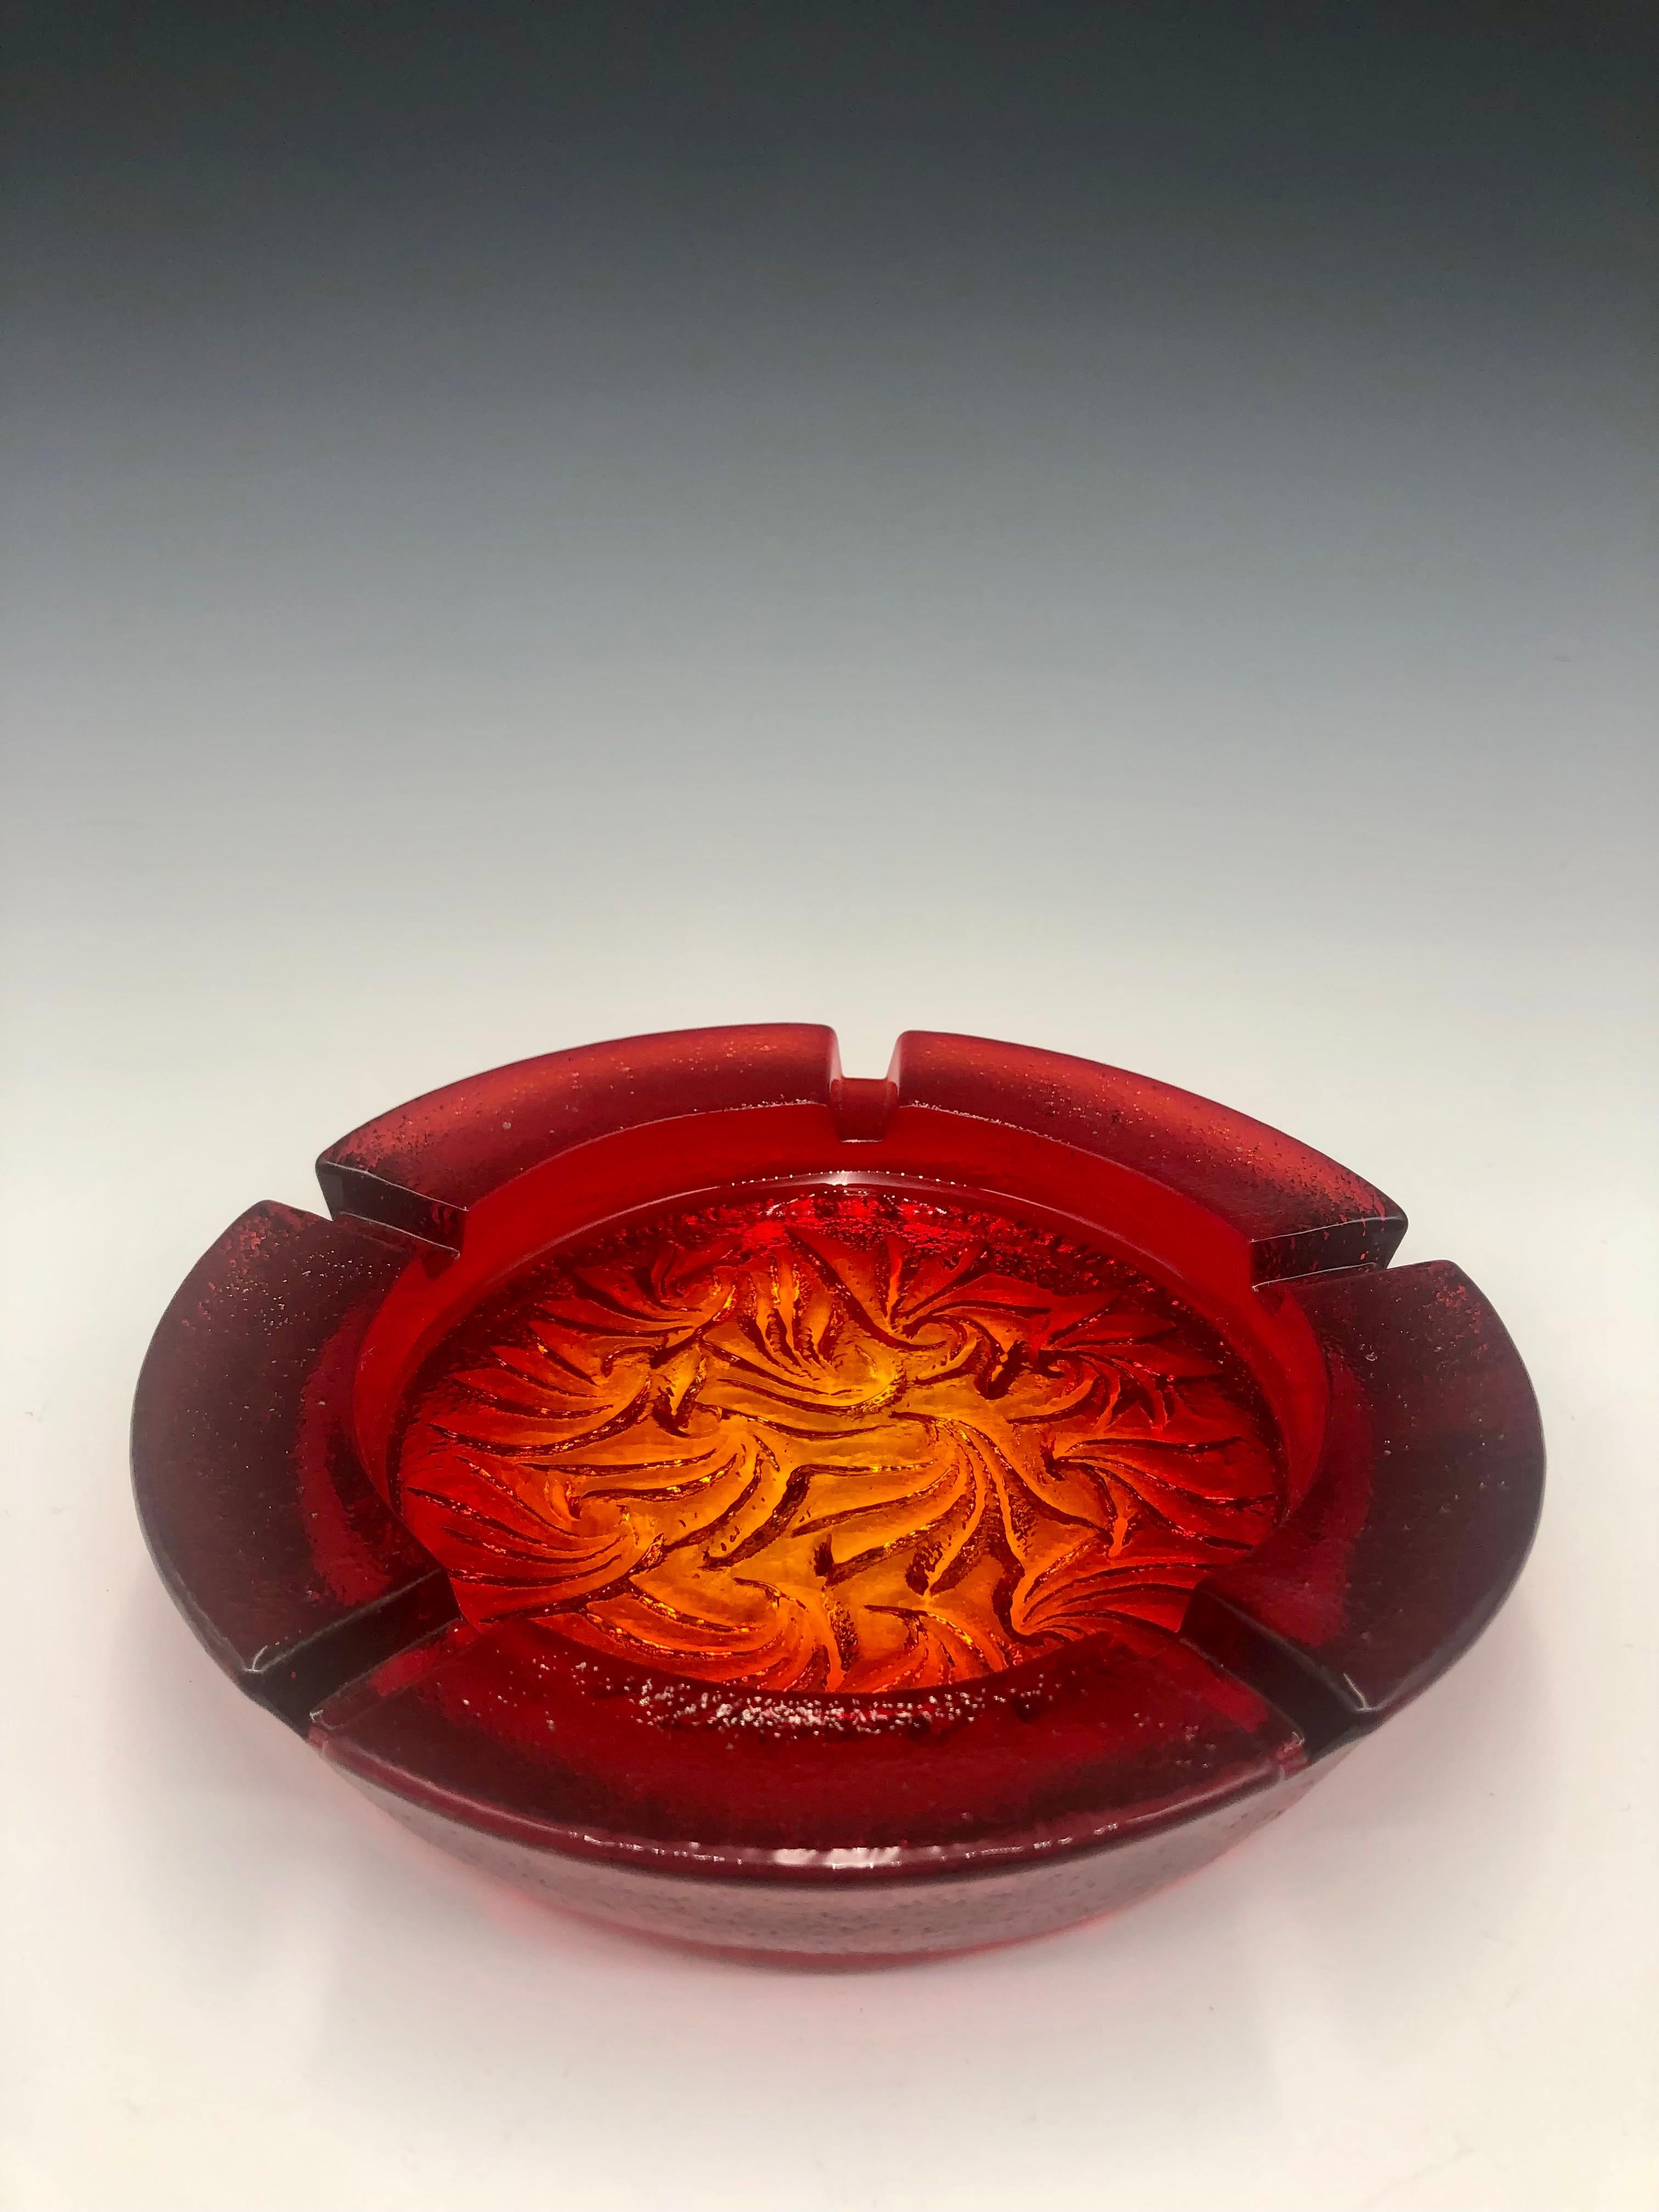 Gorgeous vintage mid-century red Fauna Amberina Blenko art glass ashtray, with a deep leaf pattern impressed on the base. Intense Amberina colors, ranging from yellow to deep orange/red. 

It is in great vintage condition, with no chips or